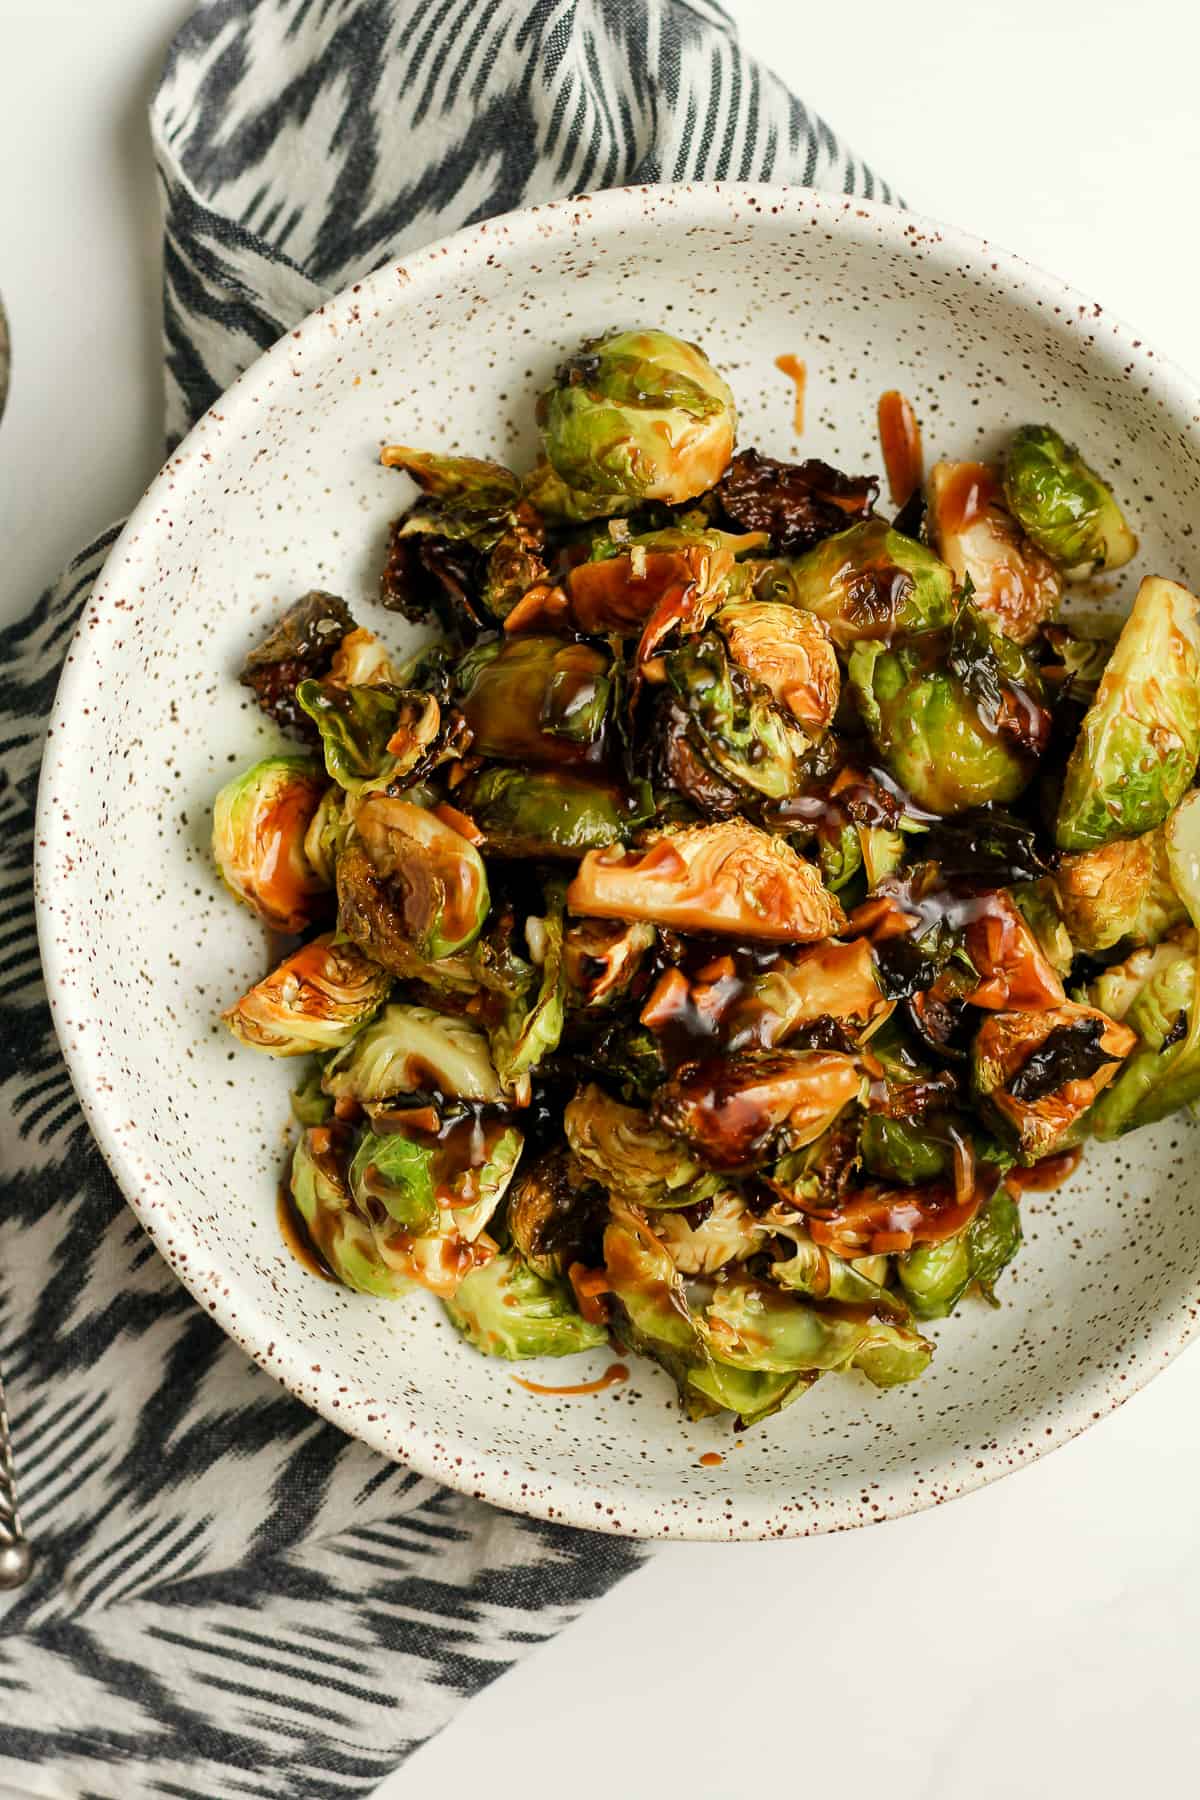 A bowl of the cooked Brussels sprouts with teriyaki sauce.